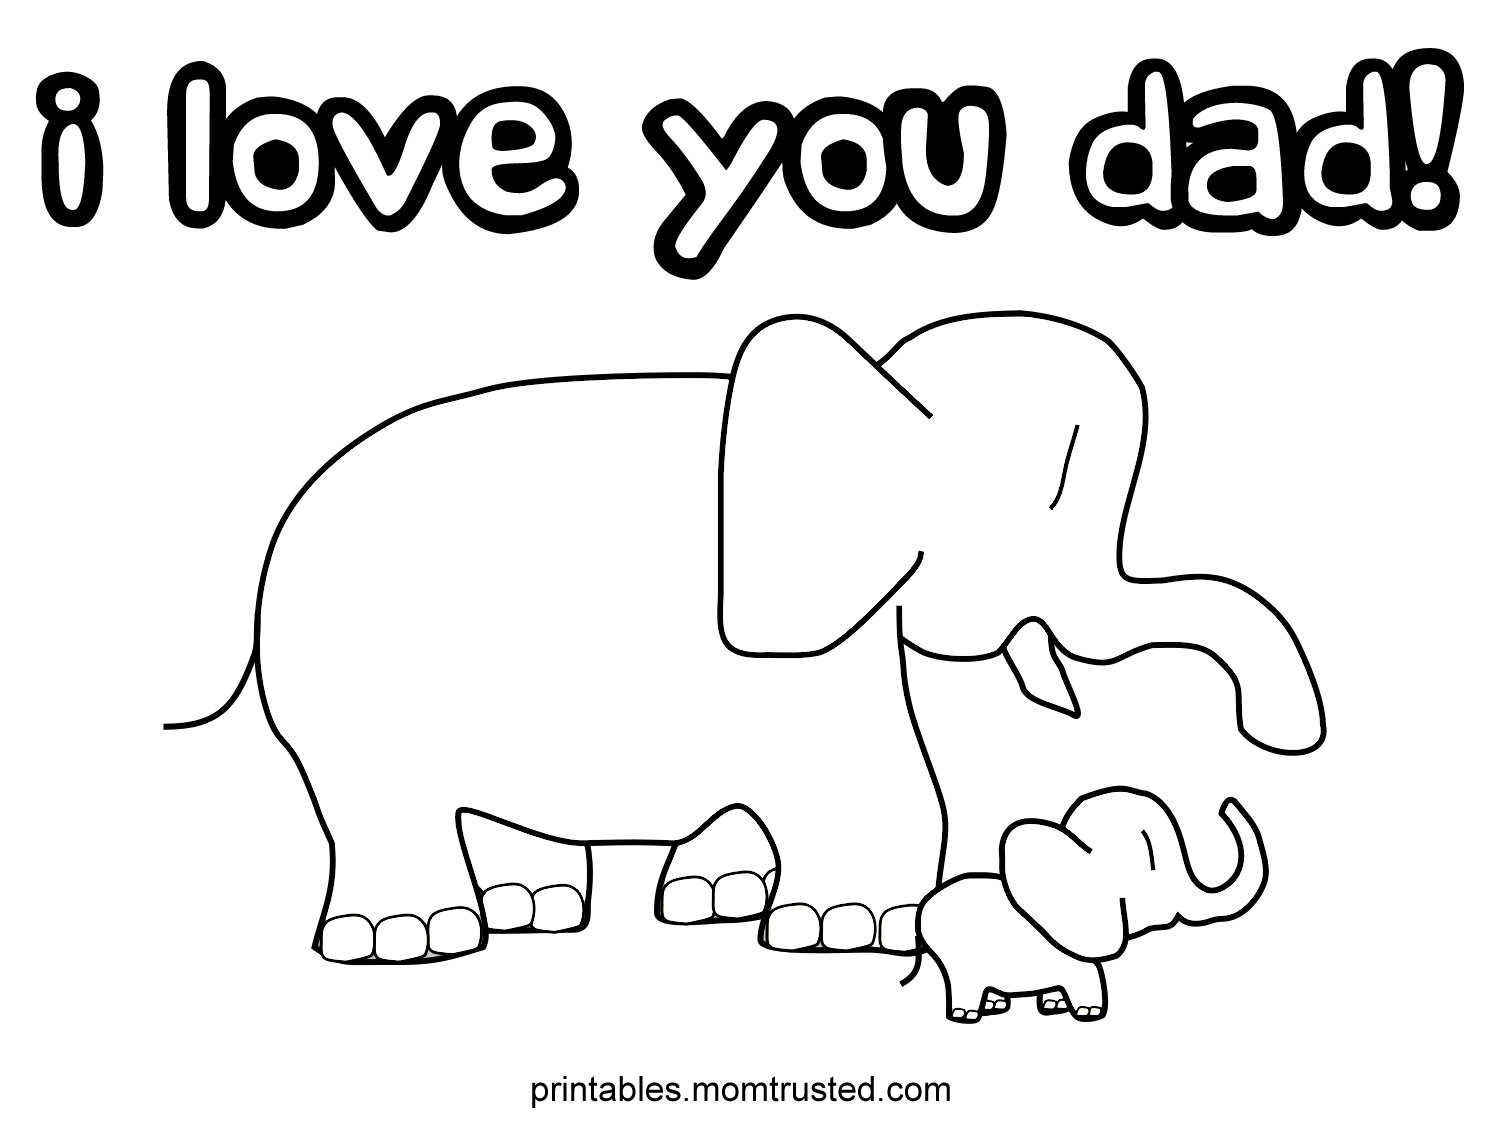 I Love You Dad Coloring Page Elephants Image